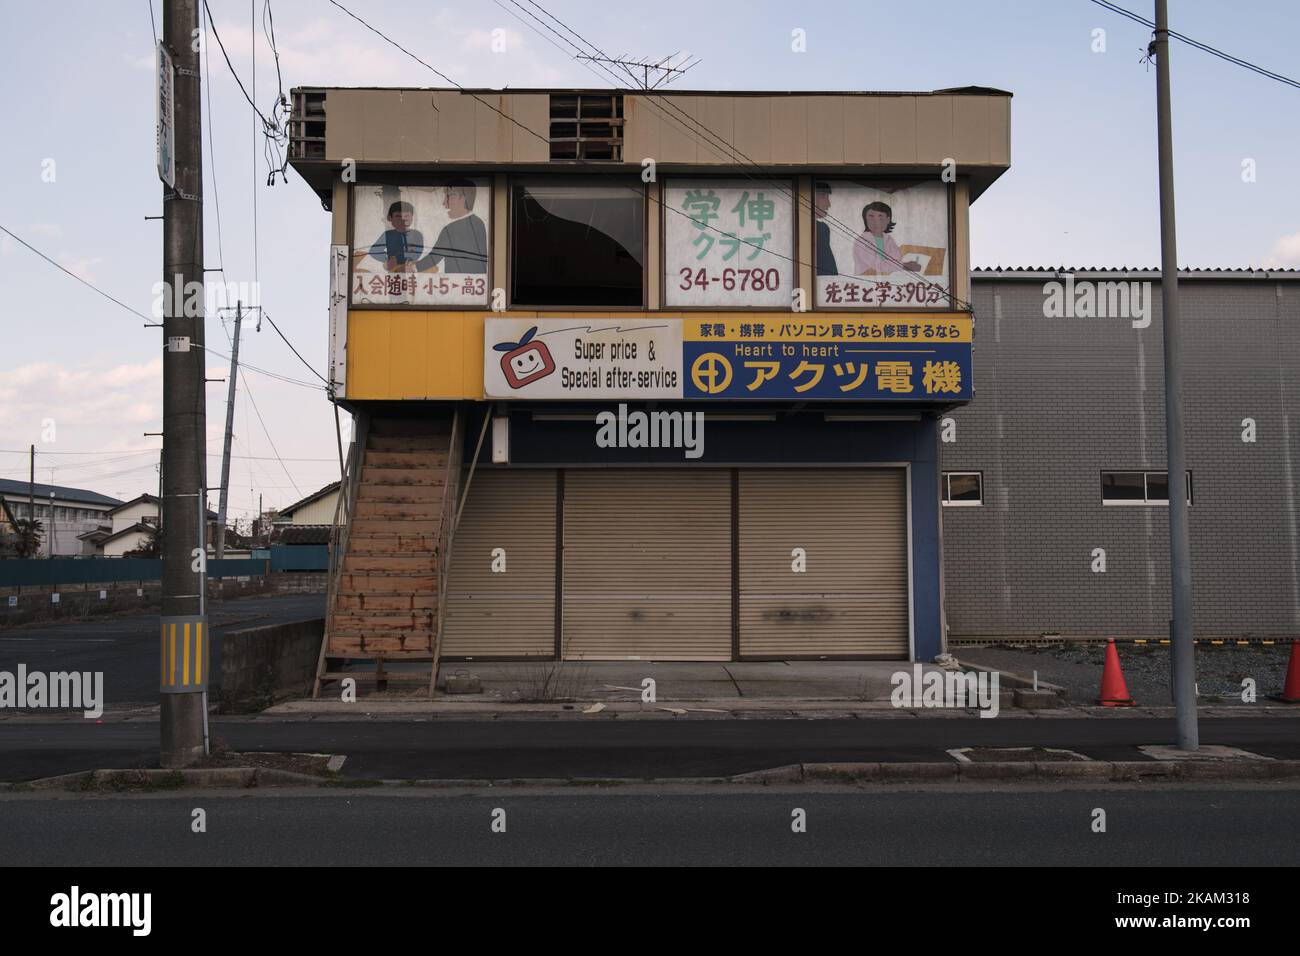 A destroyed computer store and tutoring school left behind in front of Namie station in Fukushima prefecture at 10 March 2017. Six years have passed since the Great East Japan Earthquake and Tsunami disaster on 11 March 2011. Japanese National Police Agency report confirmed 15,893 deaths and 2,556 people missing across twenty prefectures. And 123,618 people are still living in temporary housing away from their home now. The Japanese government plans to lift evacuation orders in heavily contaminated areas around Fukushima Nuclear Power Plant complex by the end of March 2017, except some parts o Stock Photo